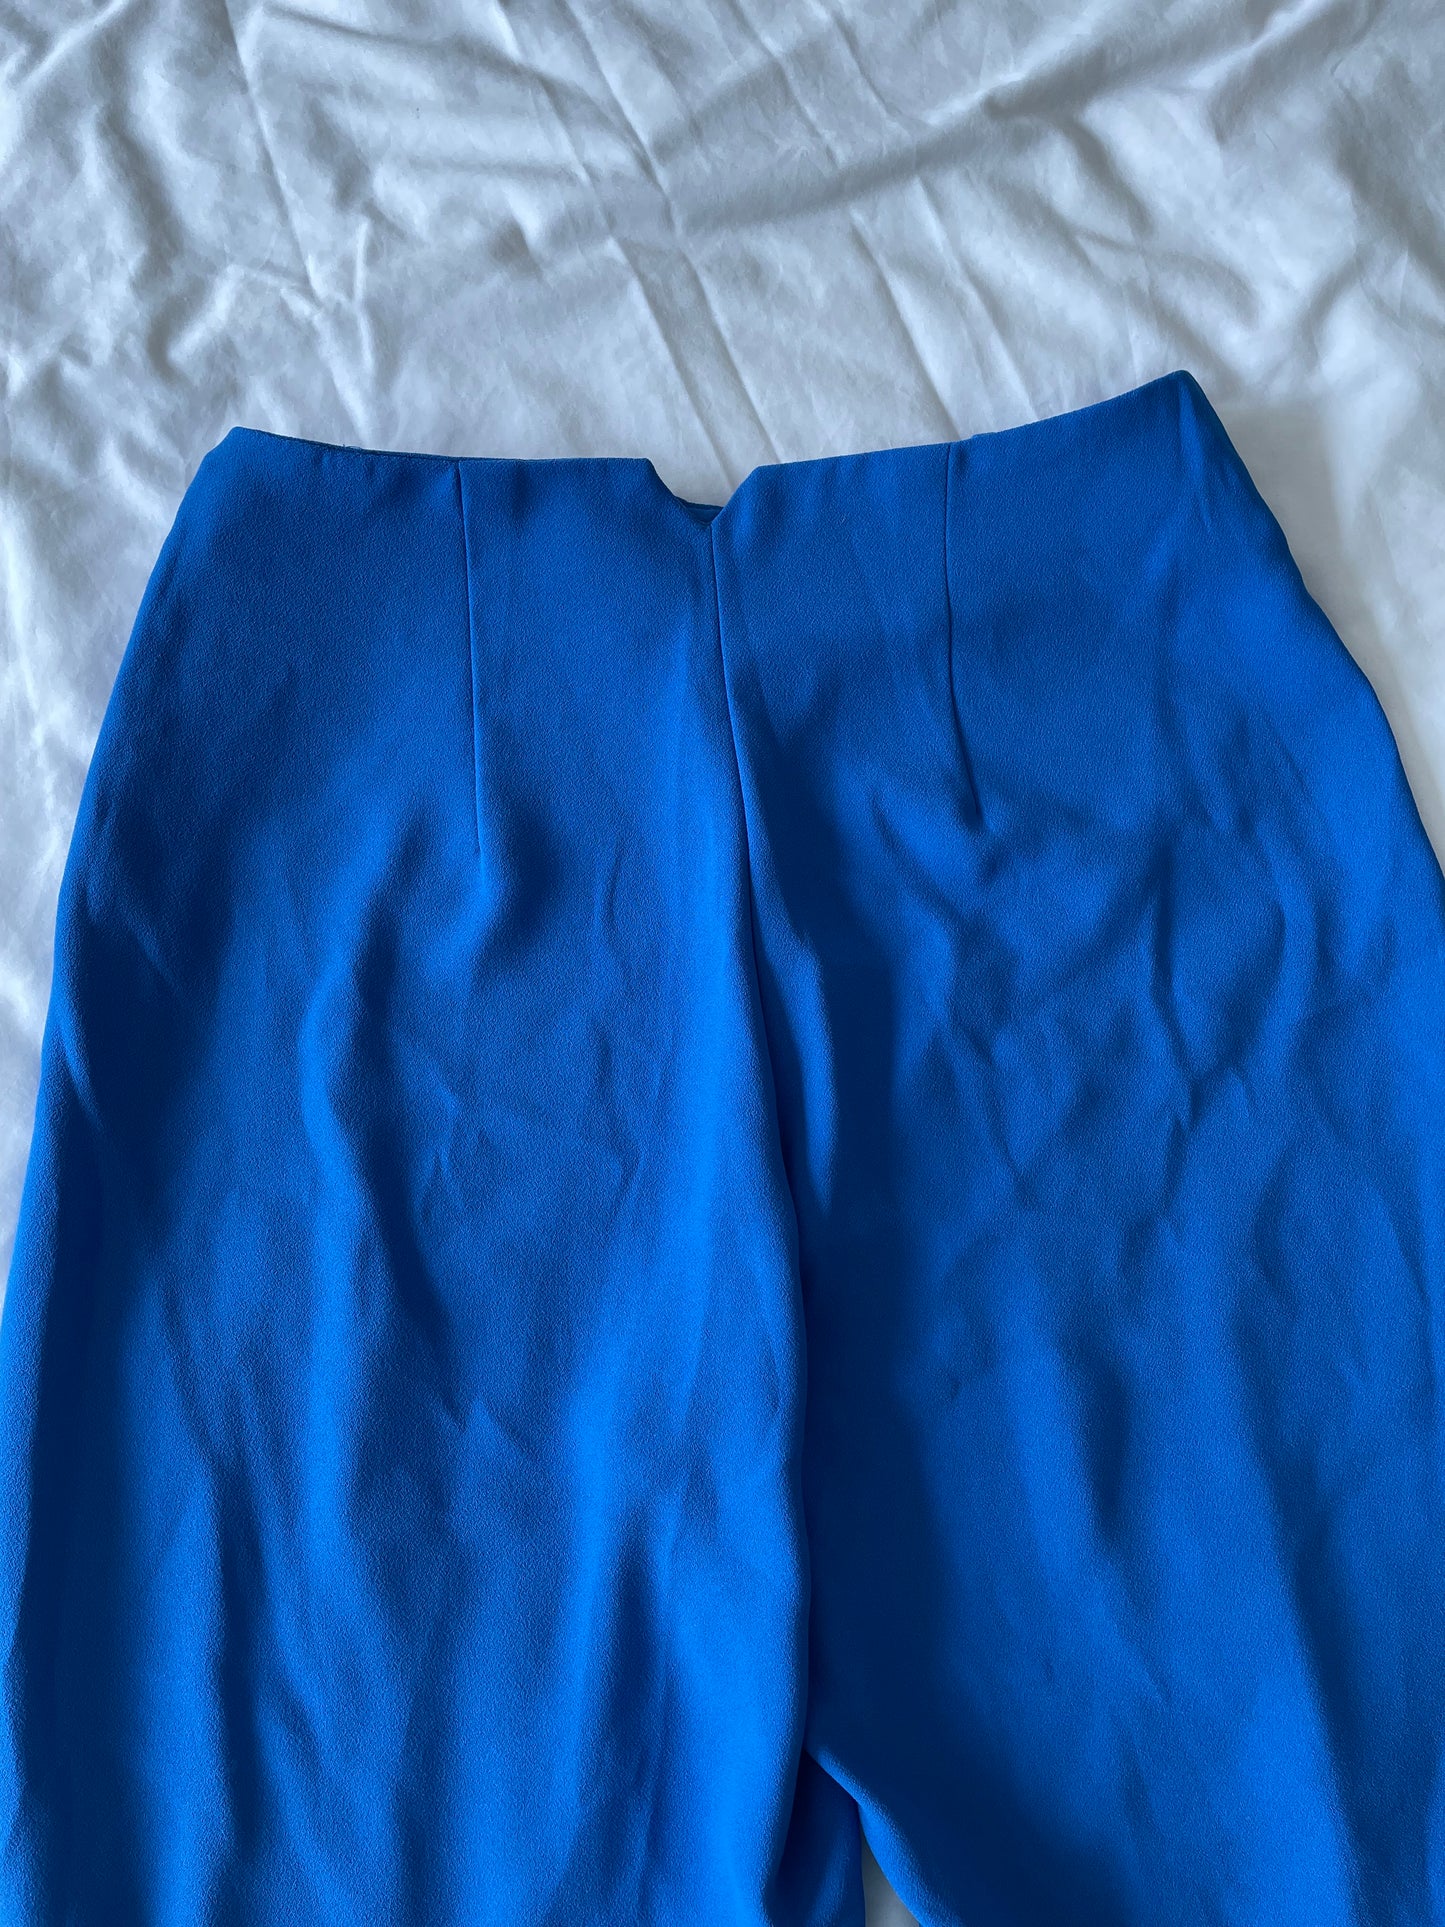 River Island Trousers - Size 8